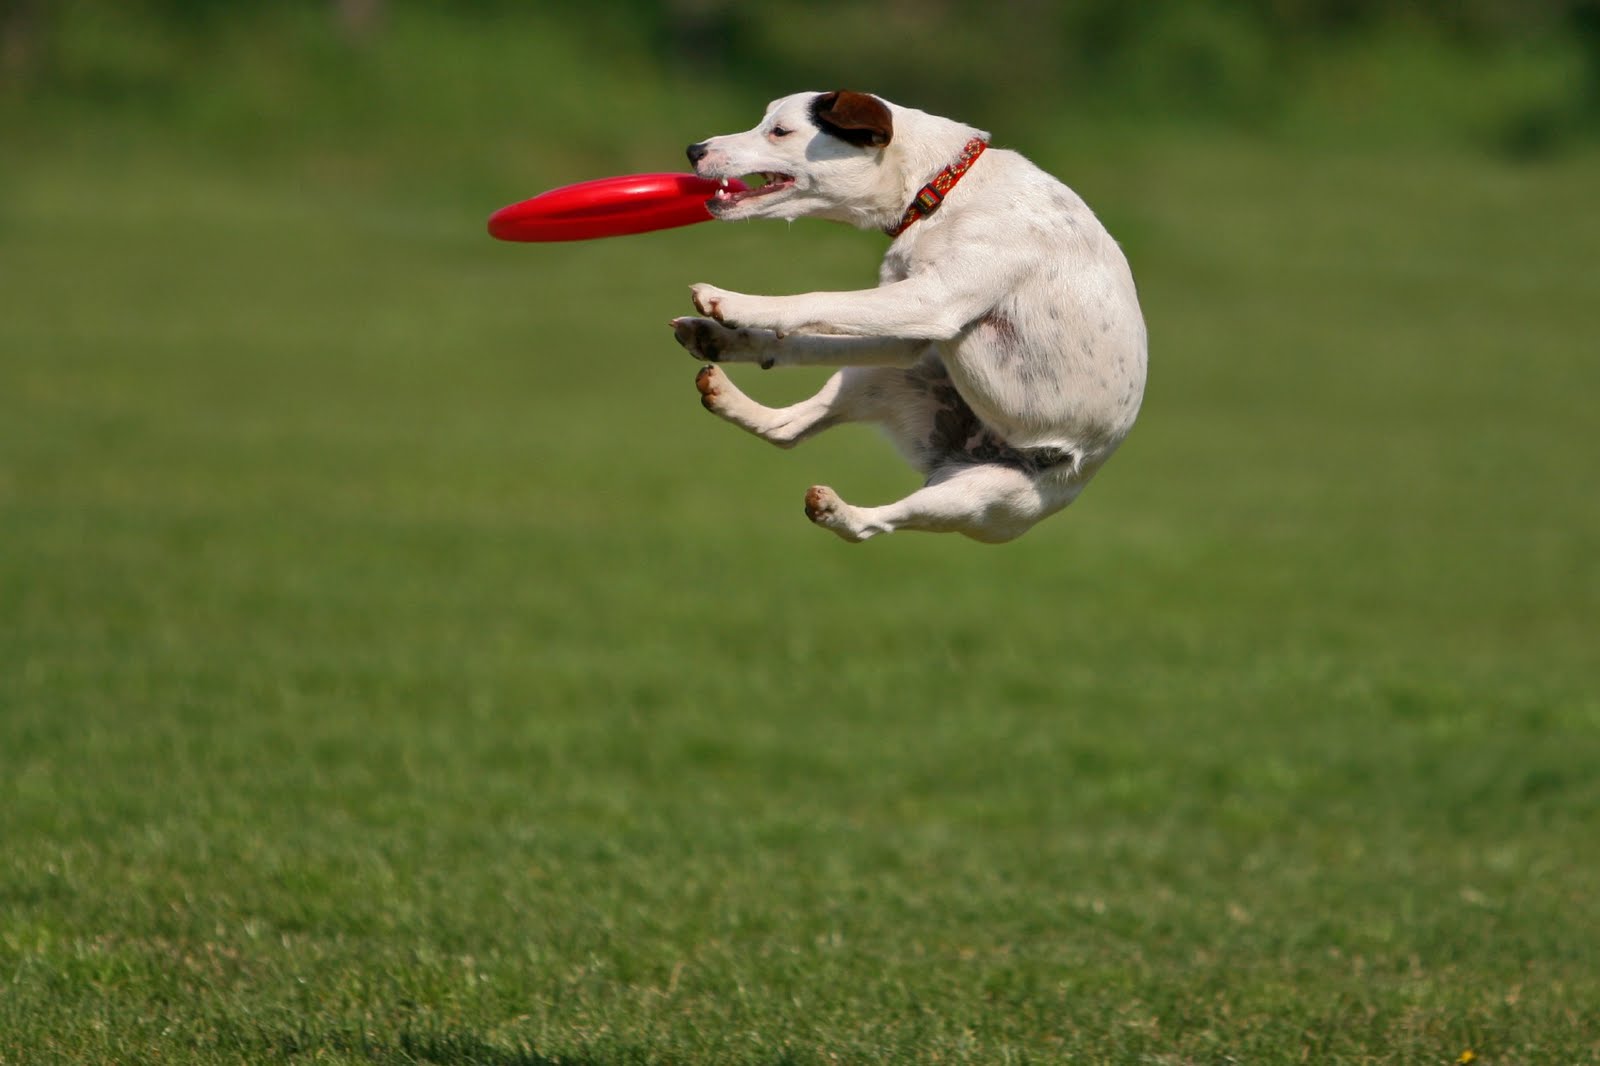 Such Good Dogs: Frisbees